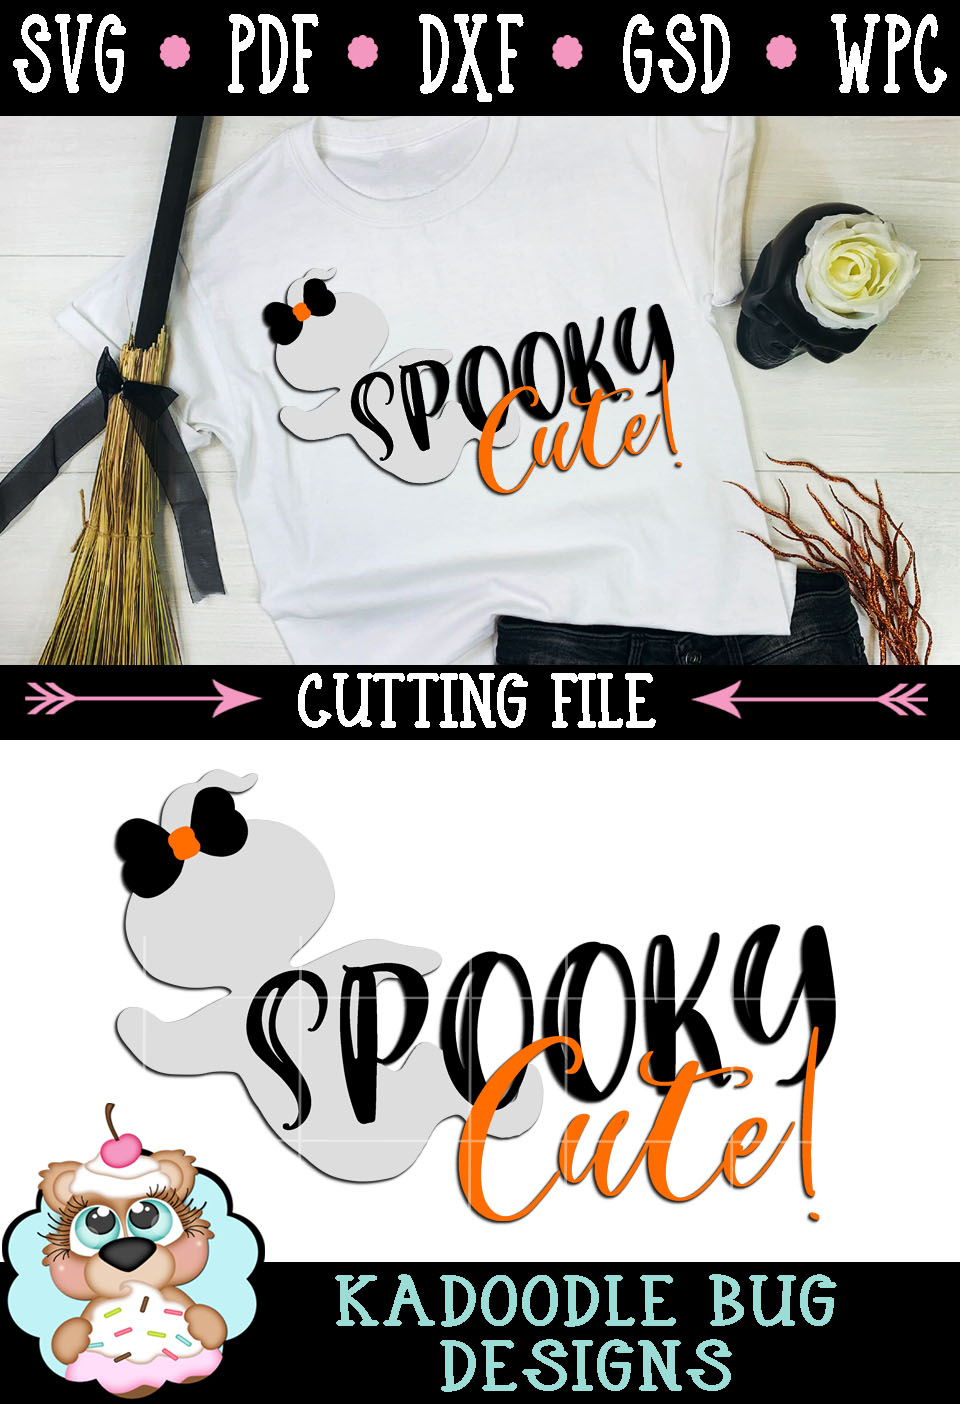 Download Halloween Spooky Cute Ghost Cut File - SVG PDF DXF GSD WPC